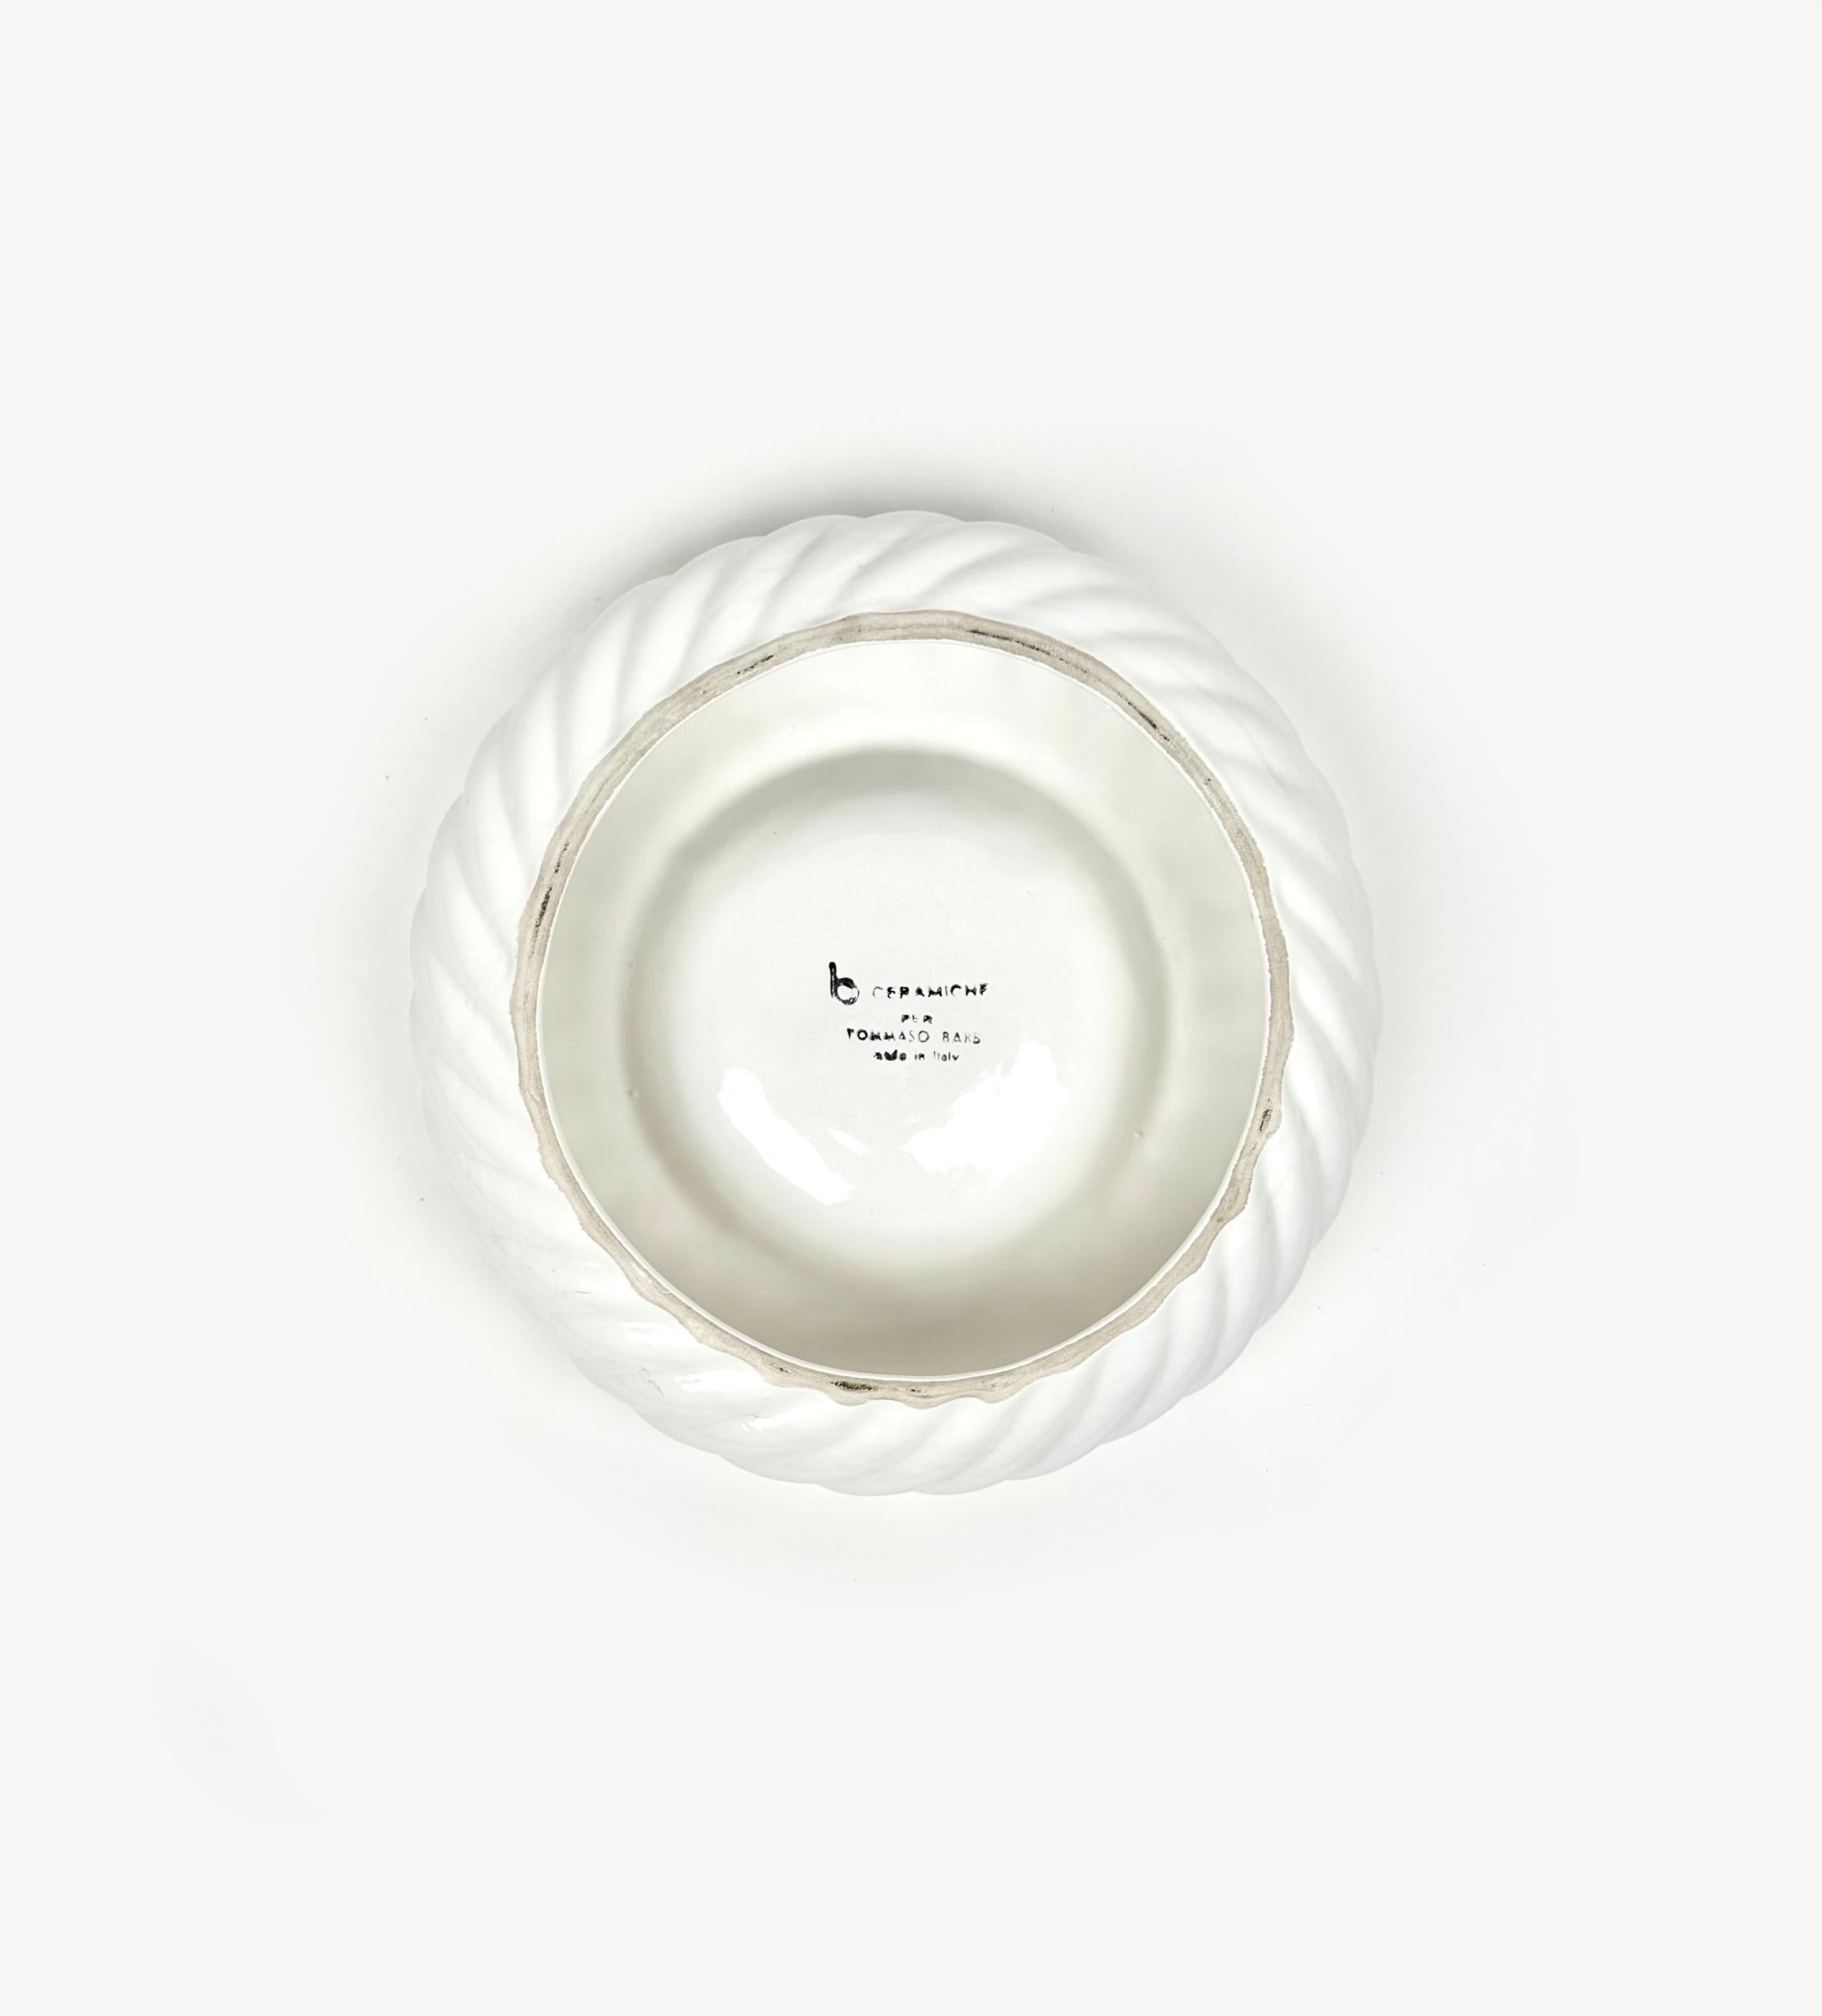 Vide-Poche or Ashtray White Ceramic and Brass by Tommaso Barbi, Italy 1970s For Sale 4